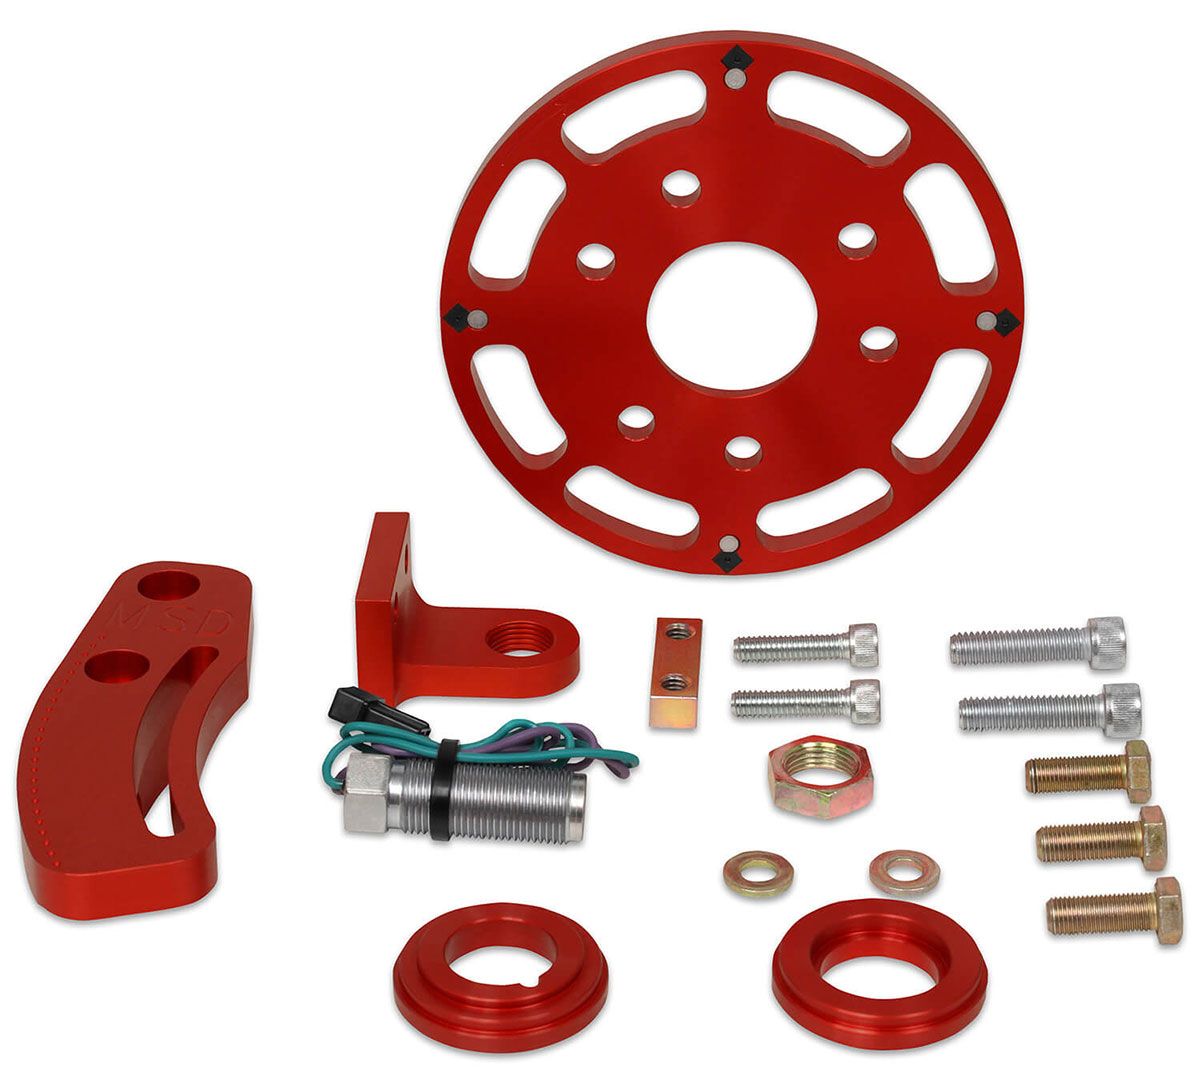 MSD8600 -  Flying Magnet Crank Trigger Small Block Chevy, with 6.25" Harmonic Balancer, Red Anodised Billet Aluminium